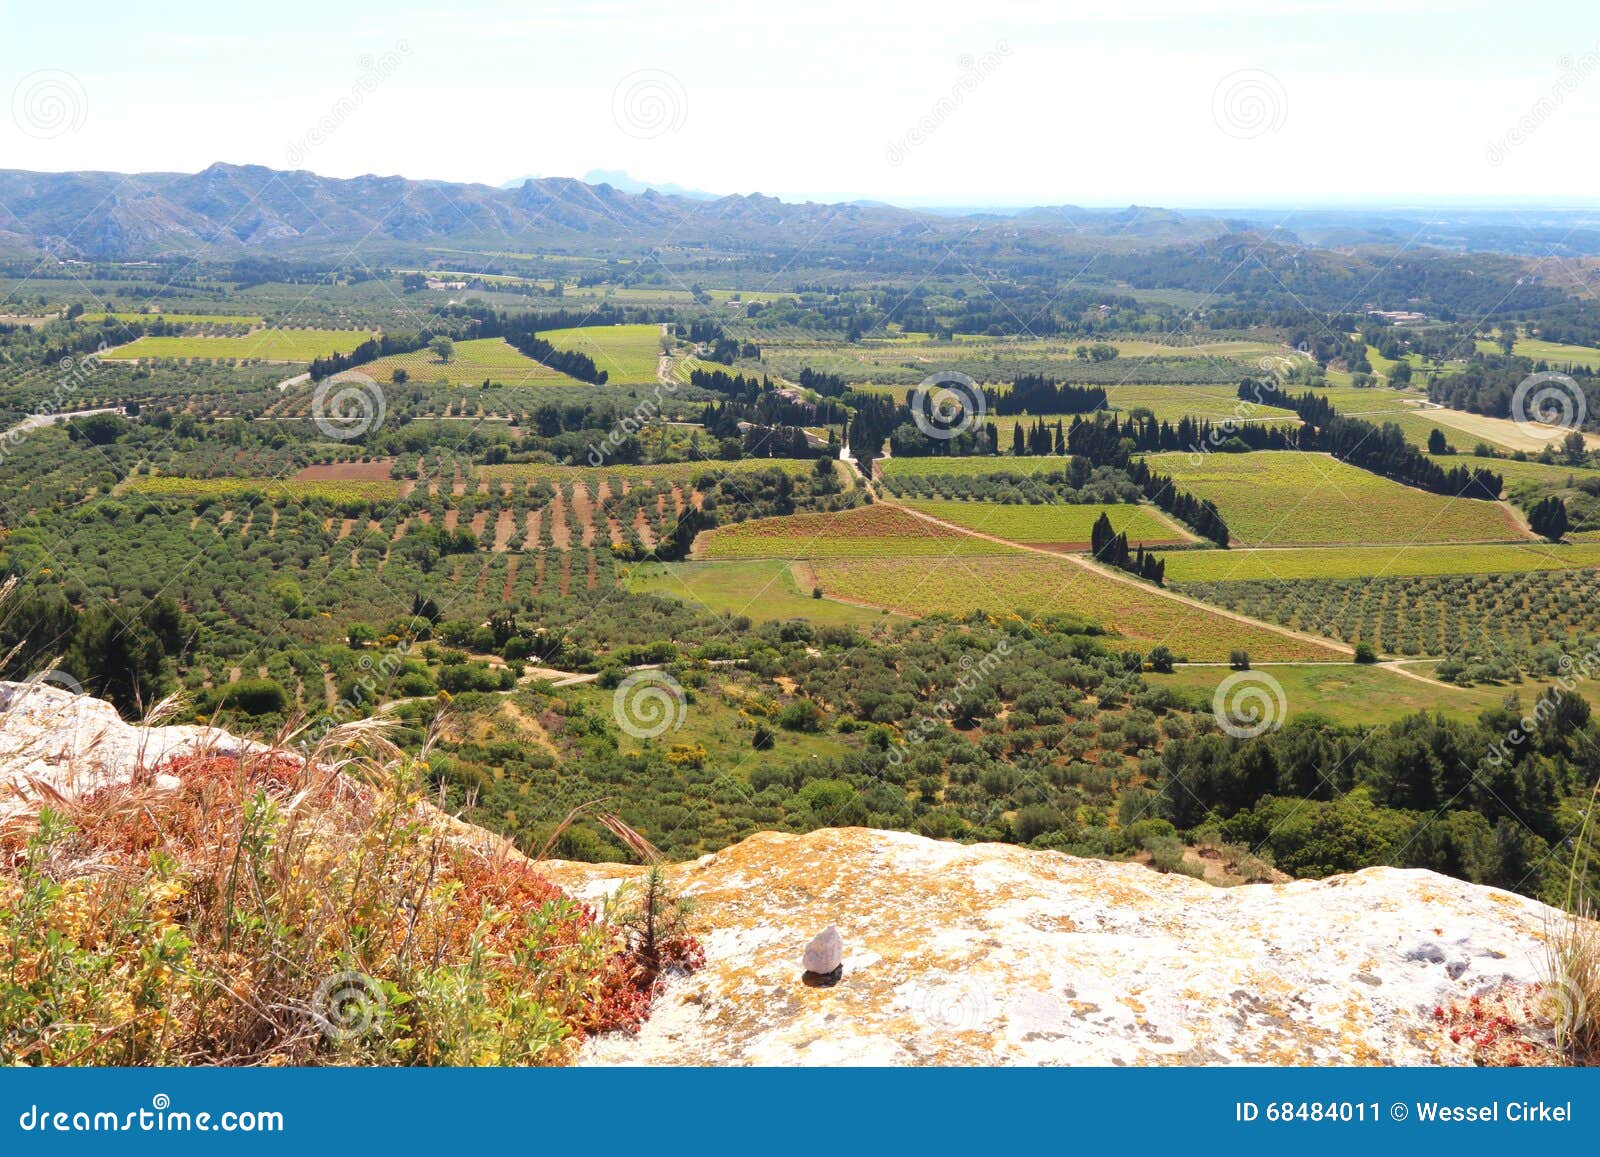 vineyards and olive groves around chÃÂ¢teau des baux, france